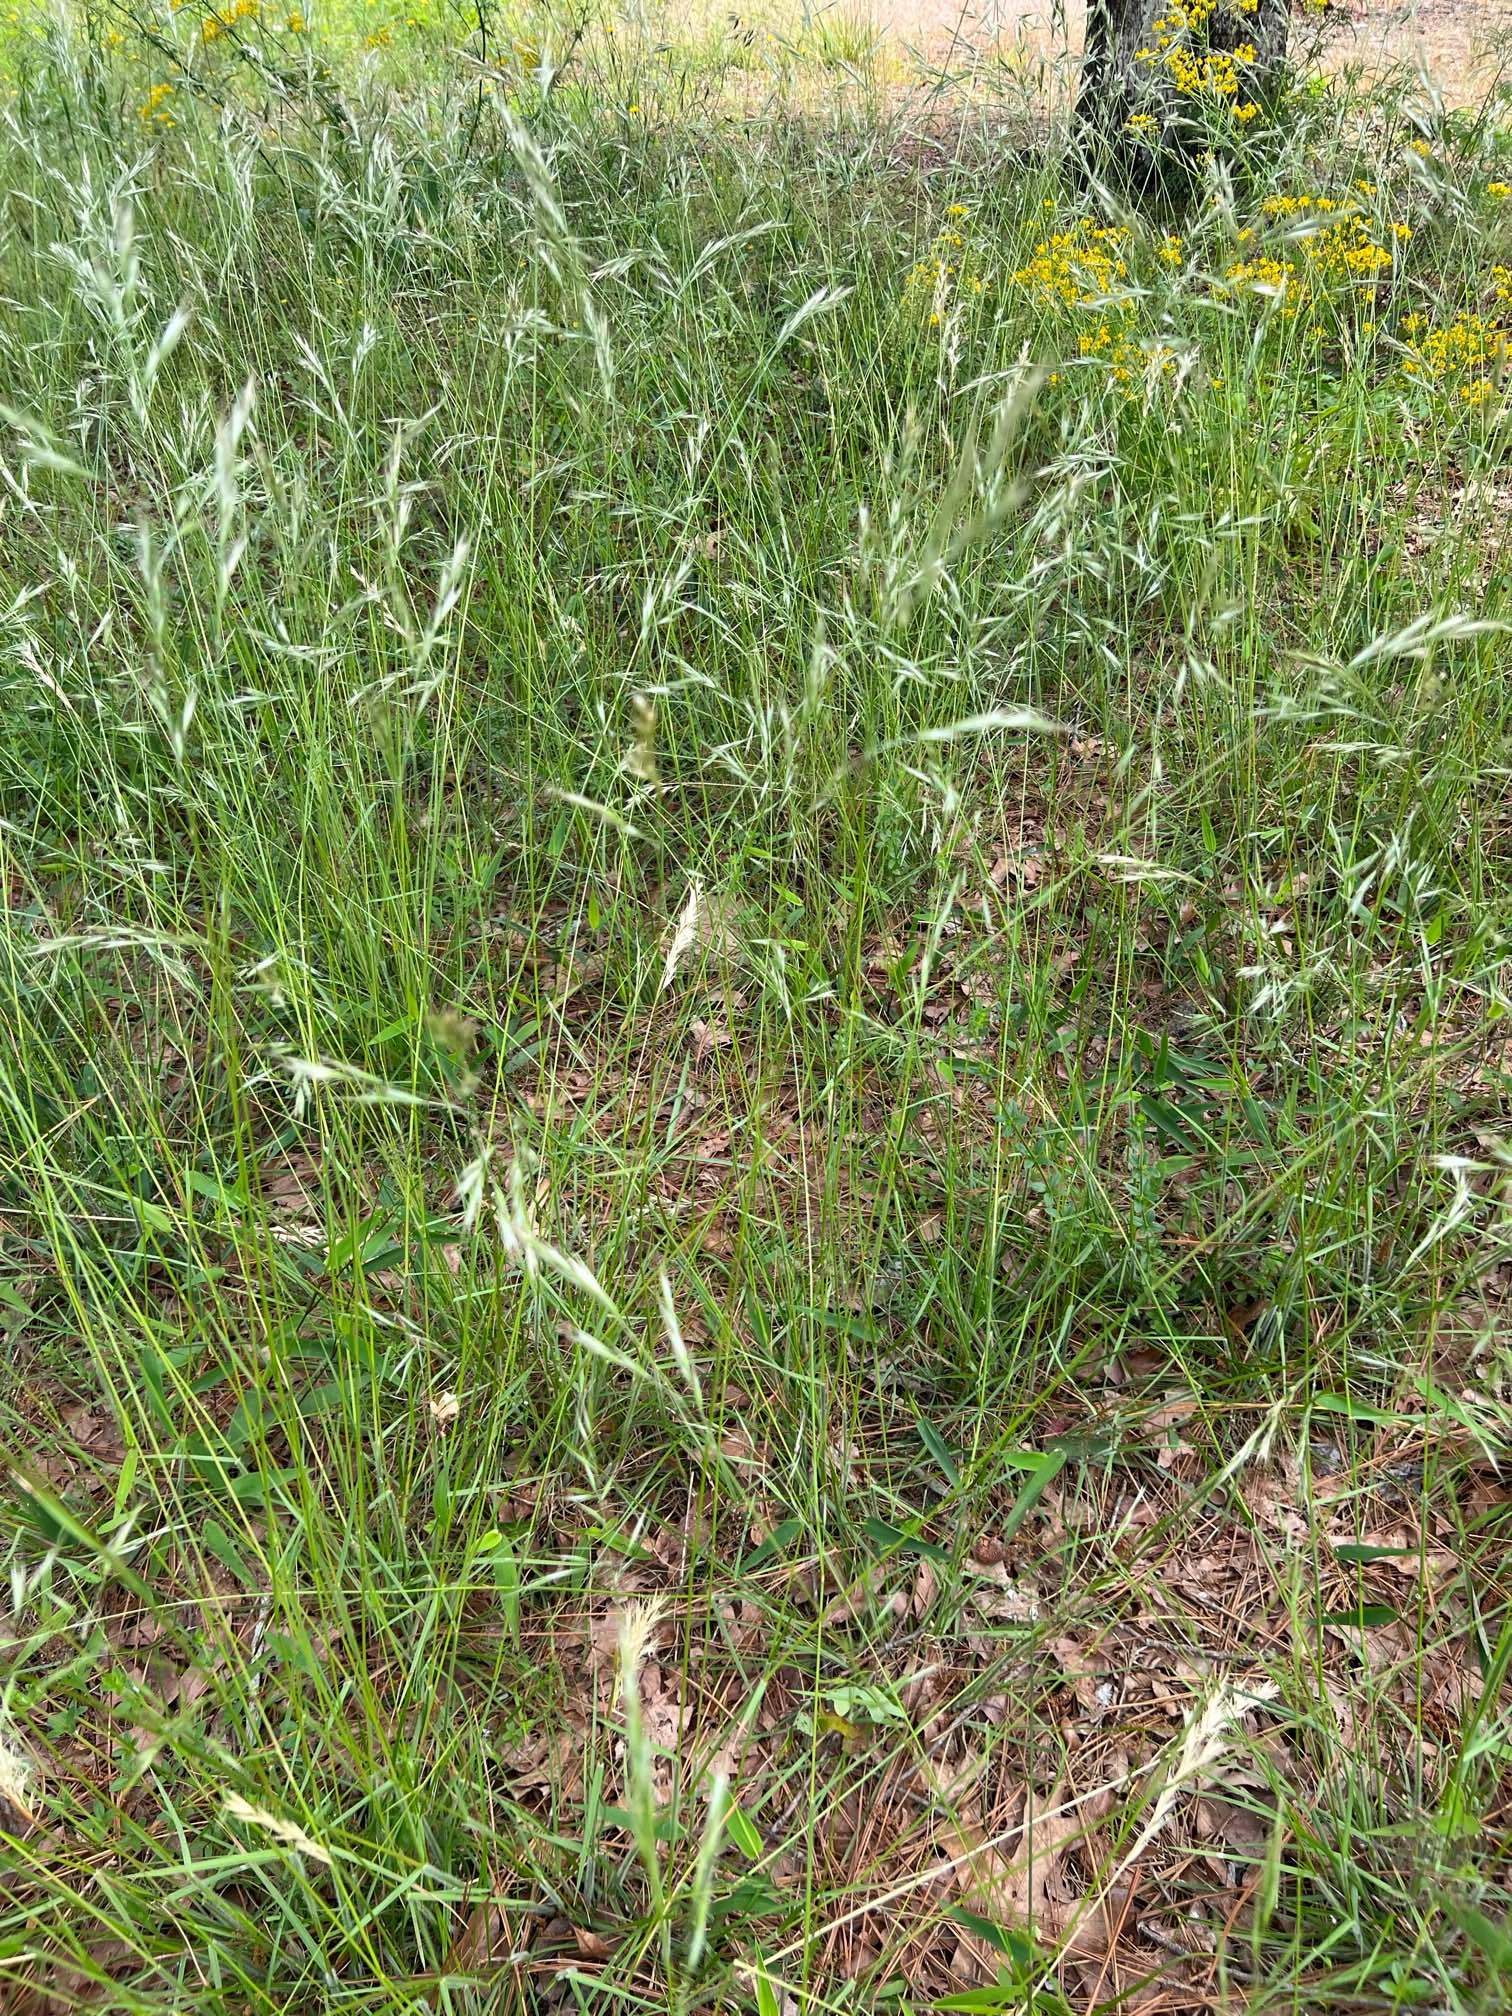 The Scientific Name is Danthonia sericea. You will likely hear them called Silky Oat-grass, Downy Danthonia. This picture shows the Attractive grass with short leaf blades and tall stems. of Danthonia sericea